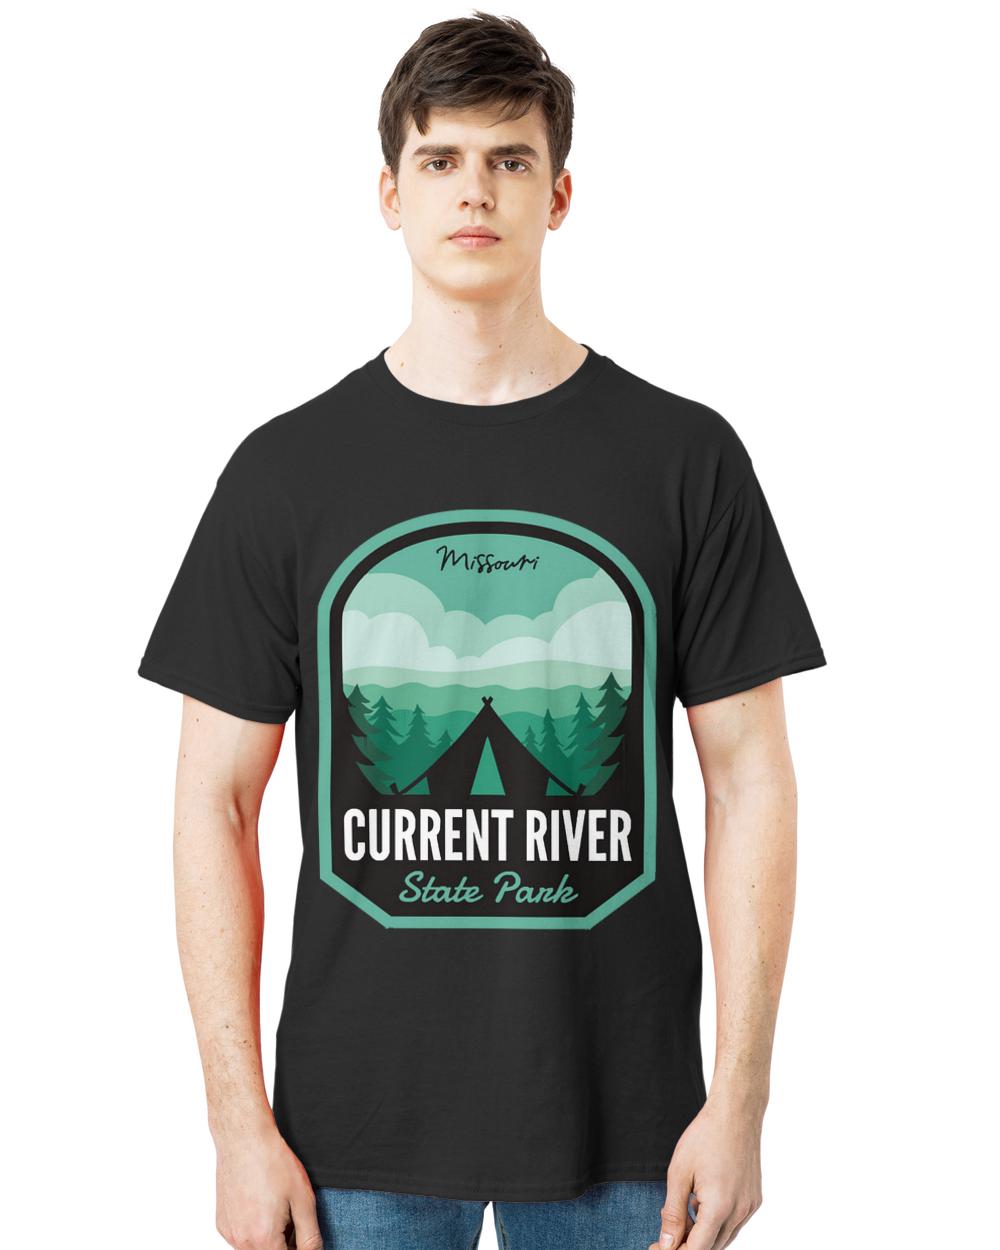 Current River State Park T- Shirt Current River State Park M O Camping 293